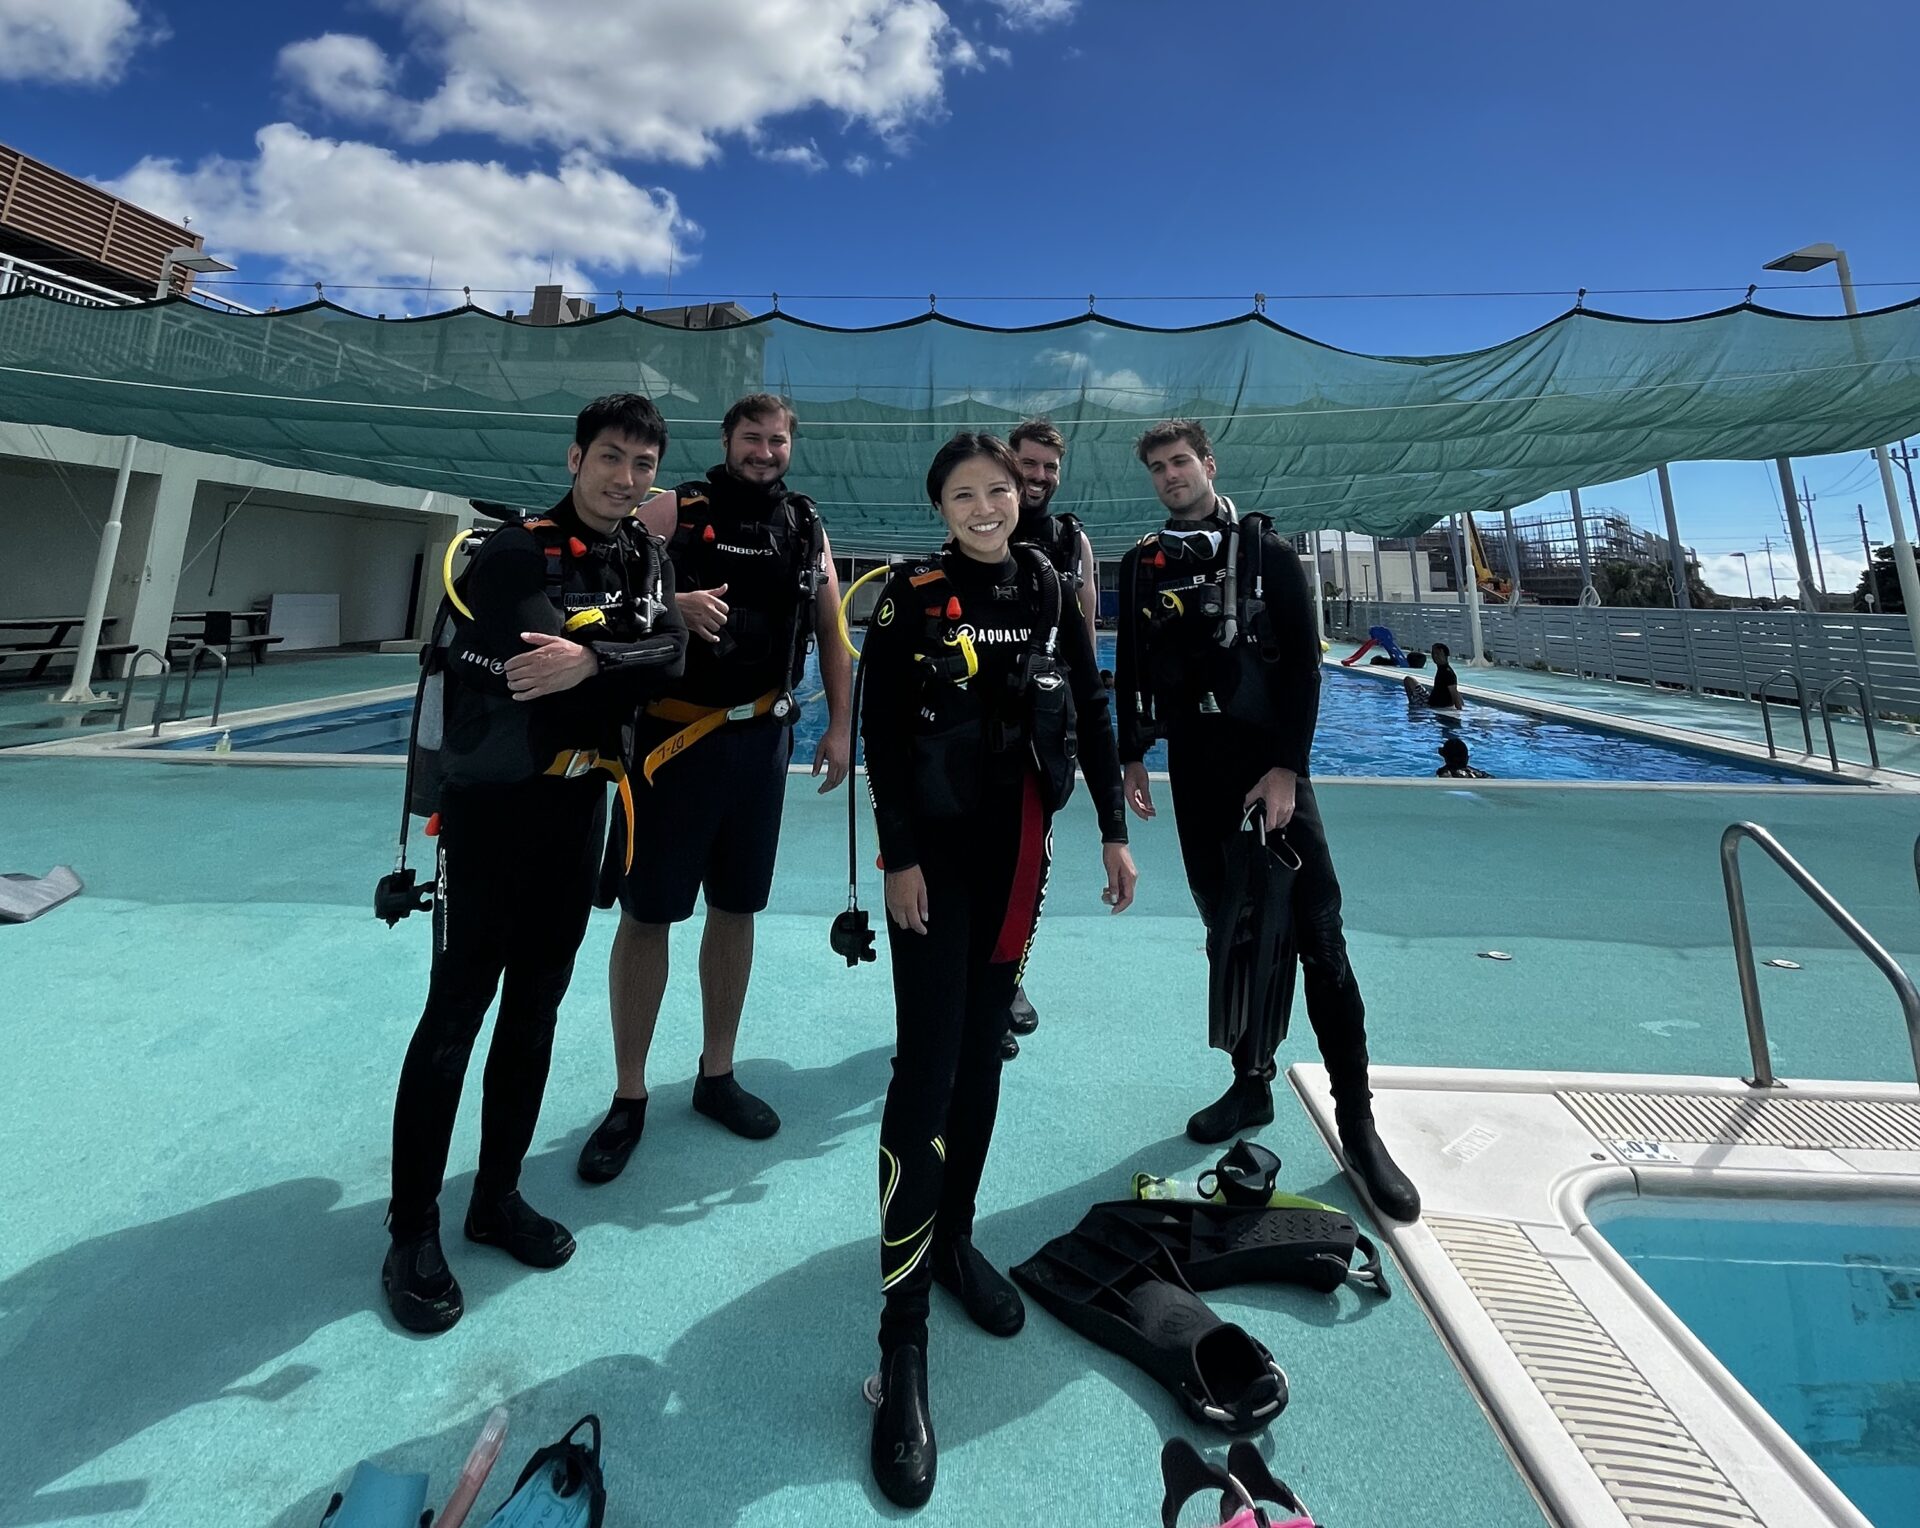 PADI open water diver course in Okinawa